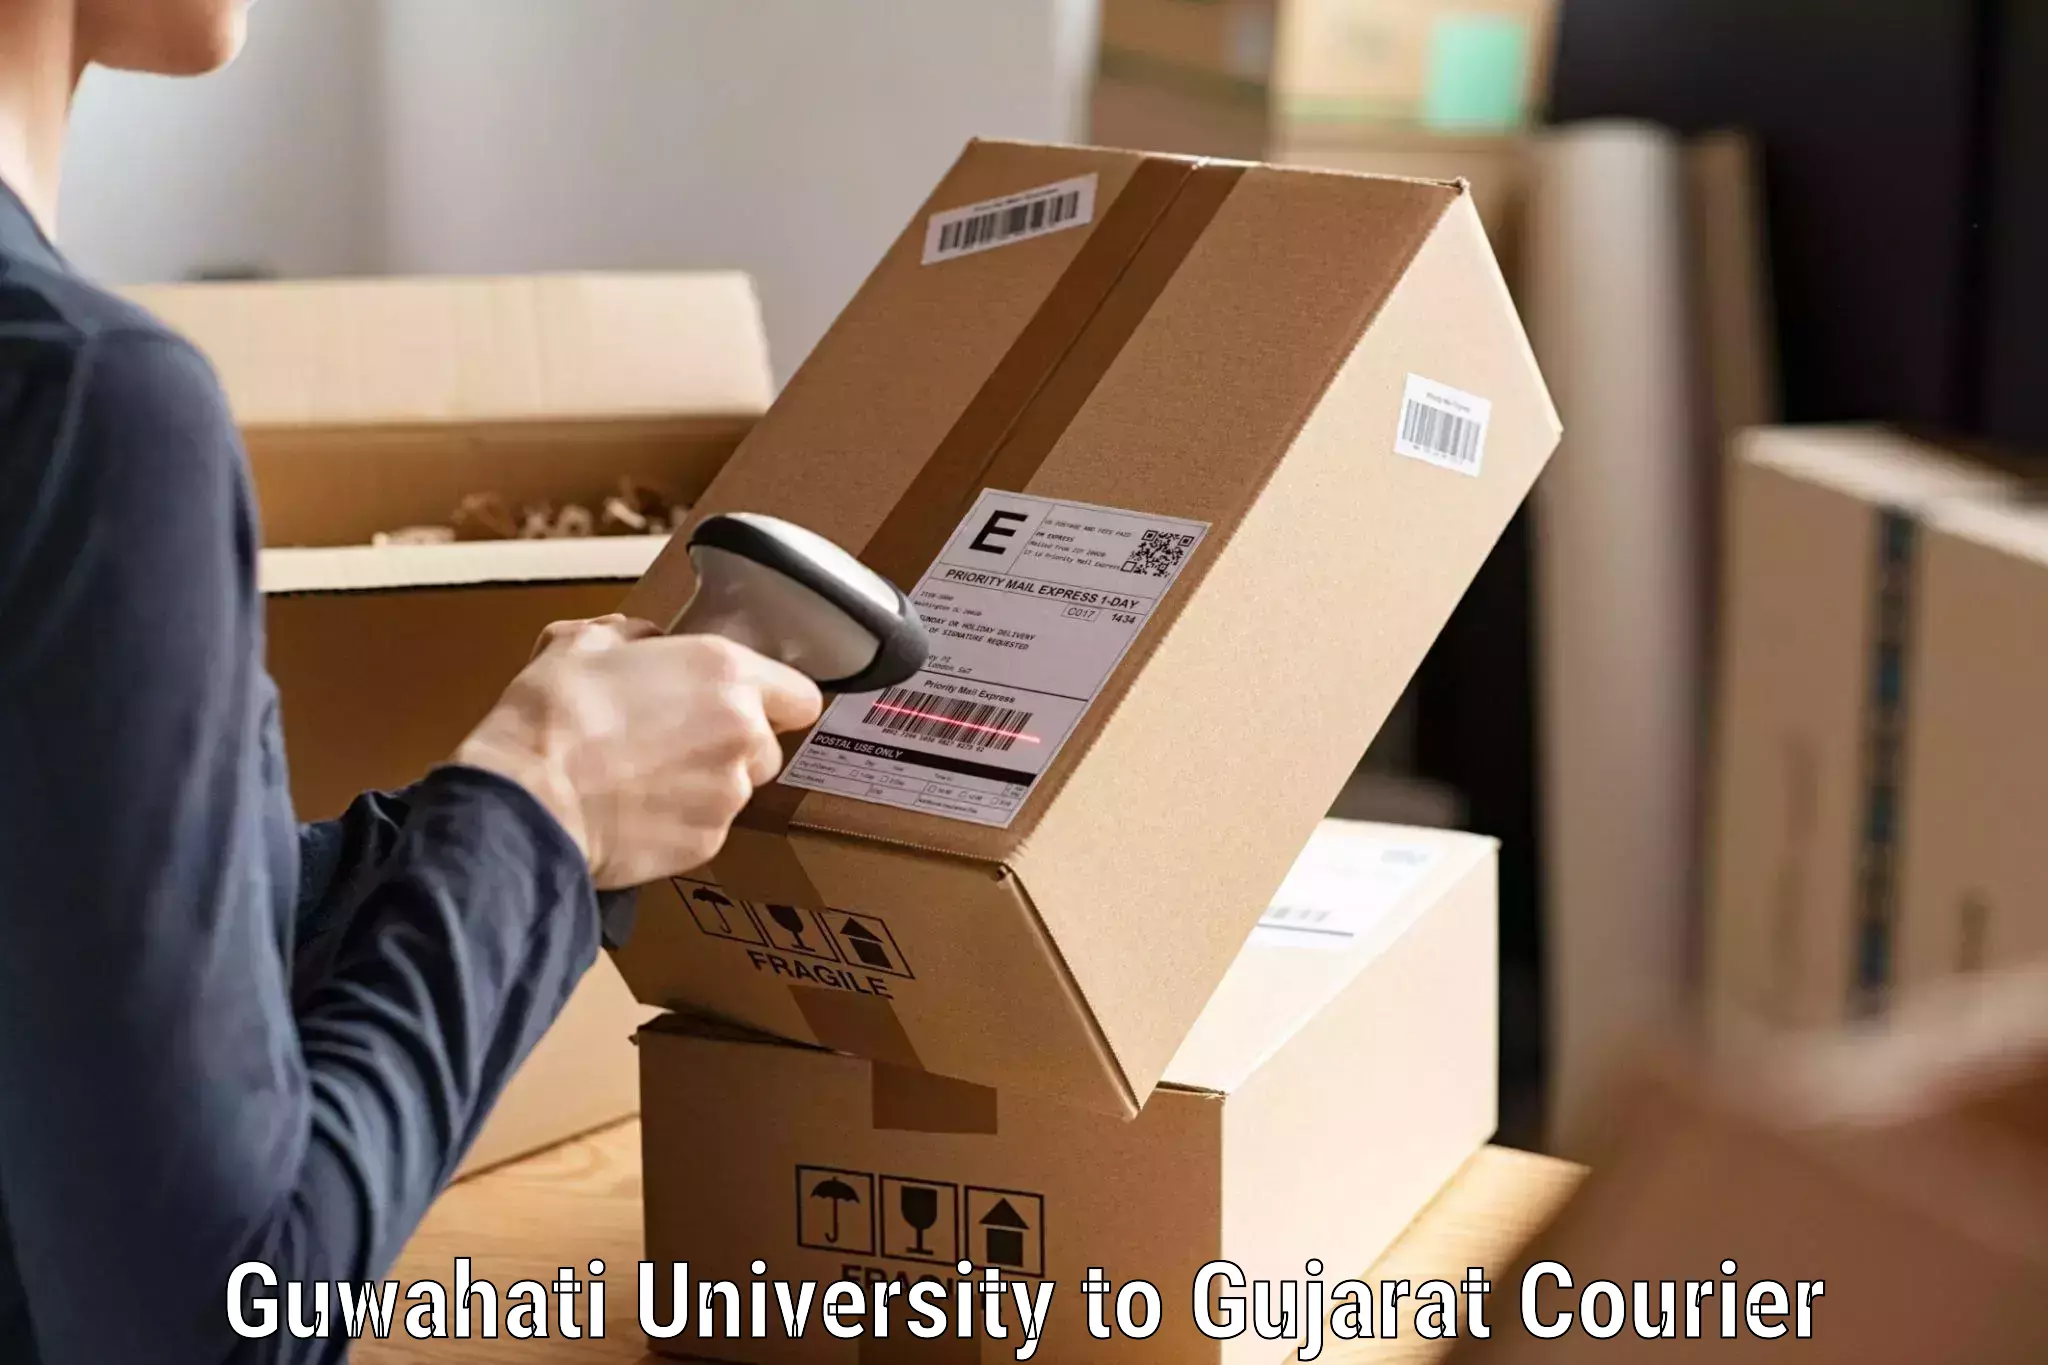 Expedited parcel delivery Guwahati University to Tarapur